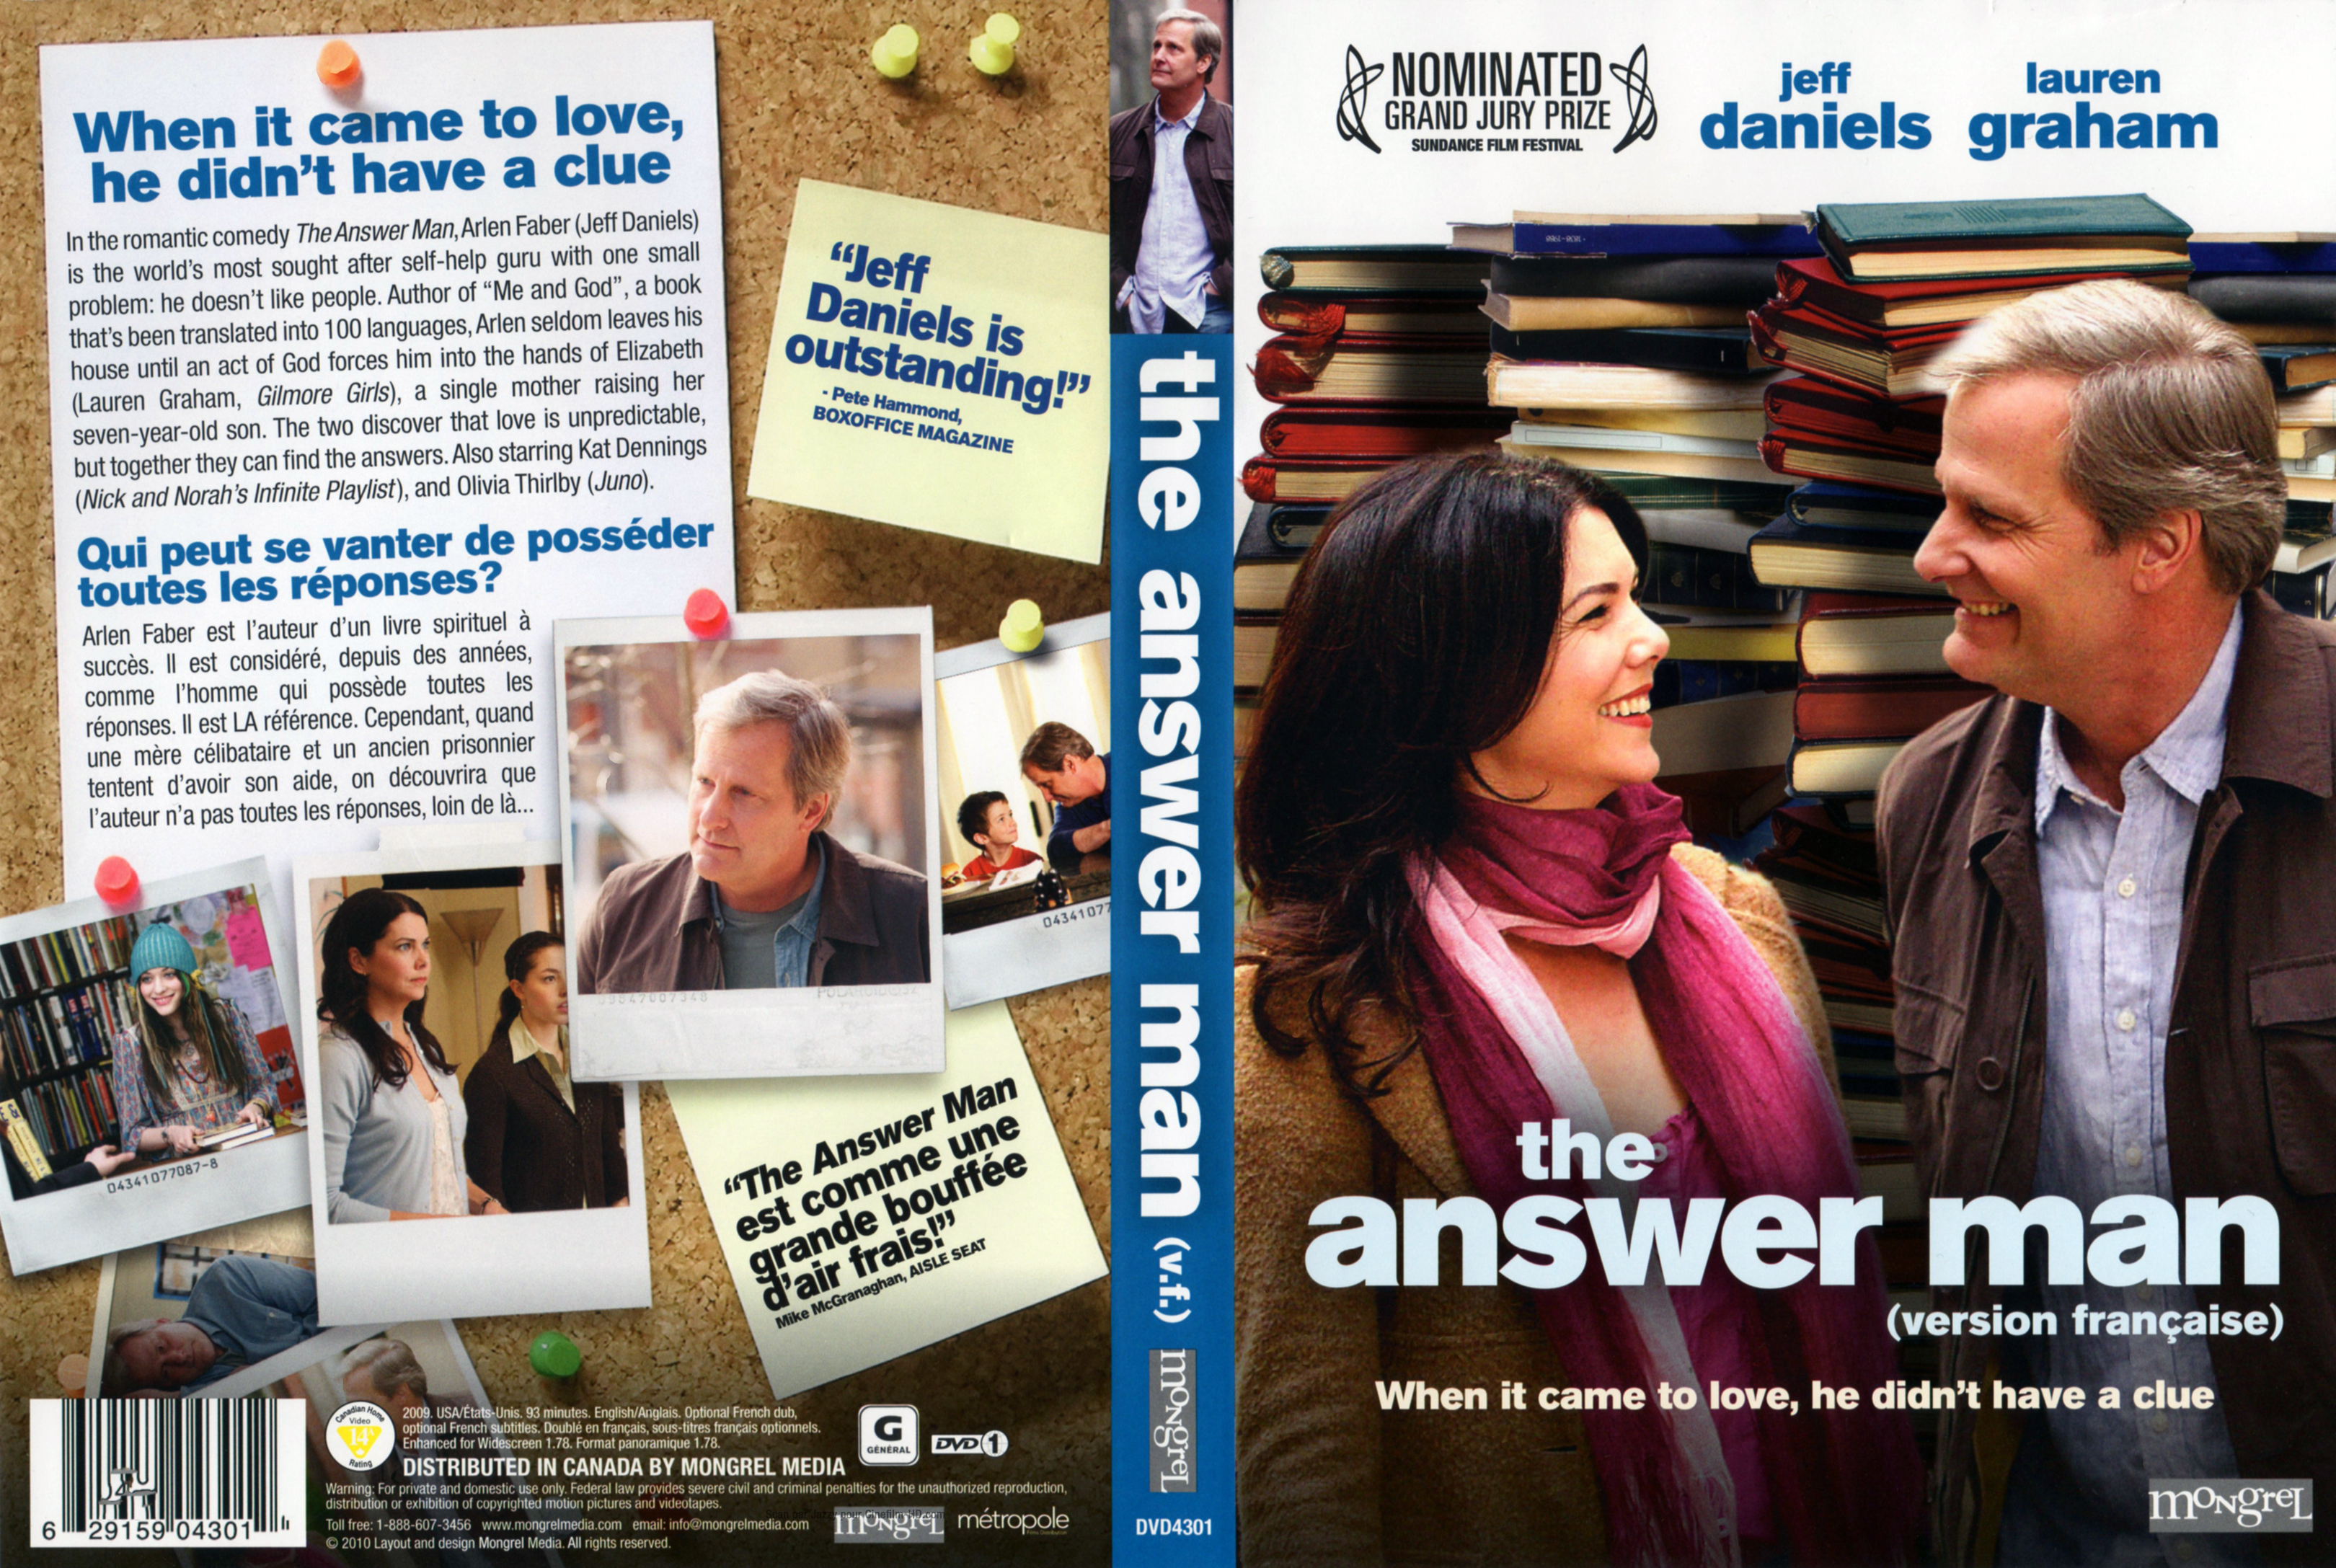 Jaquette DVD The answer man (Canadienne)